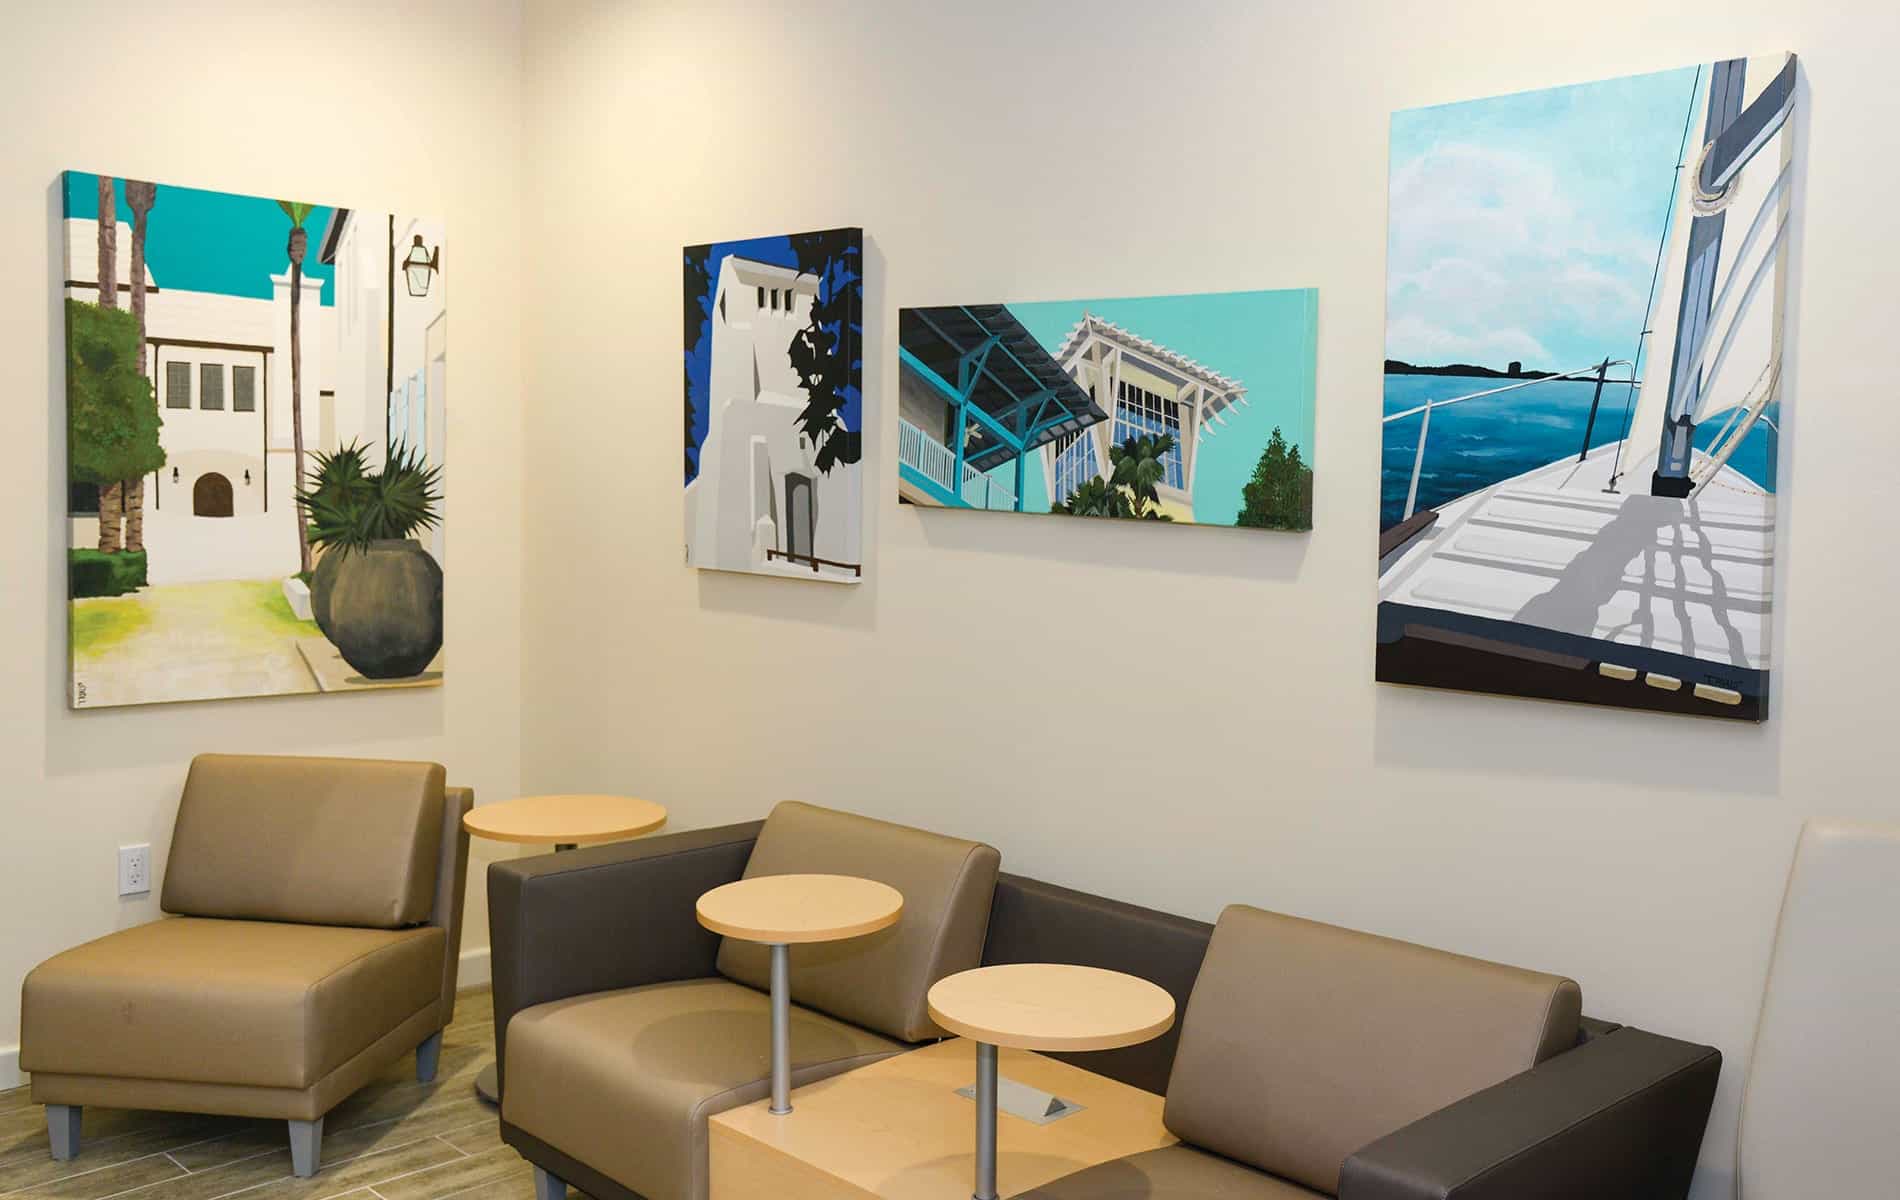 Paintings by Tim Ryals in the Emerald Coast Association of Realtors office